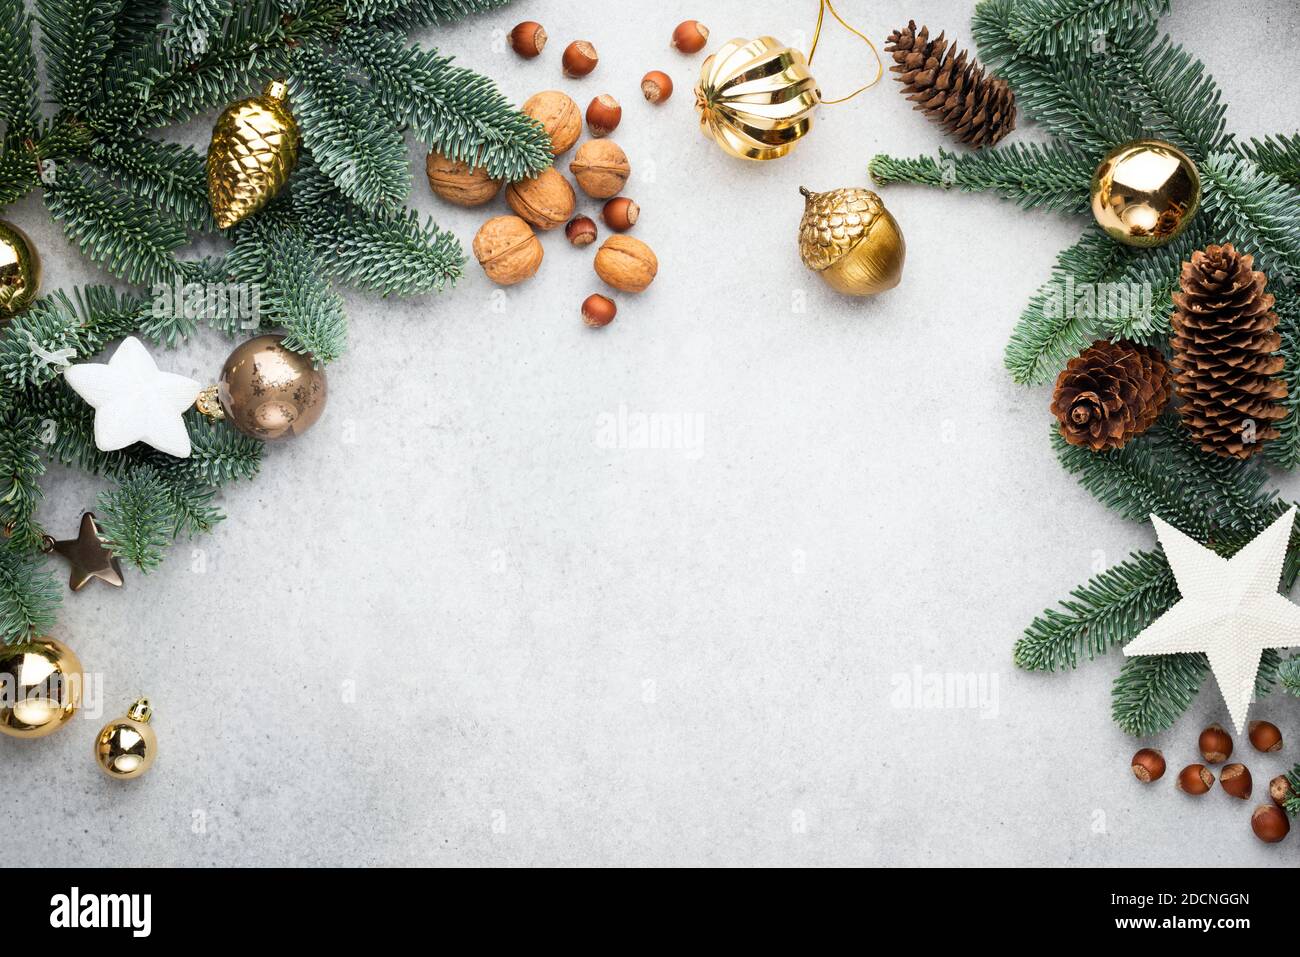 Christmas Or New Year Frame Background Made Of Fir Tree Branches, Pine Cones And Christmas Toys. Trendy Modern Christmas Decorations Frame. Design Moc Stock Photo